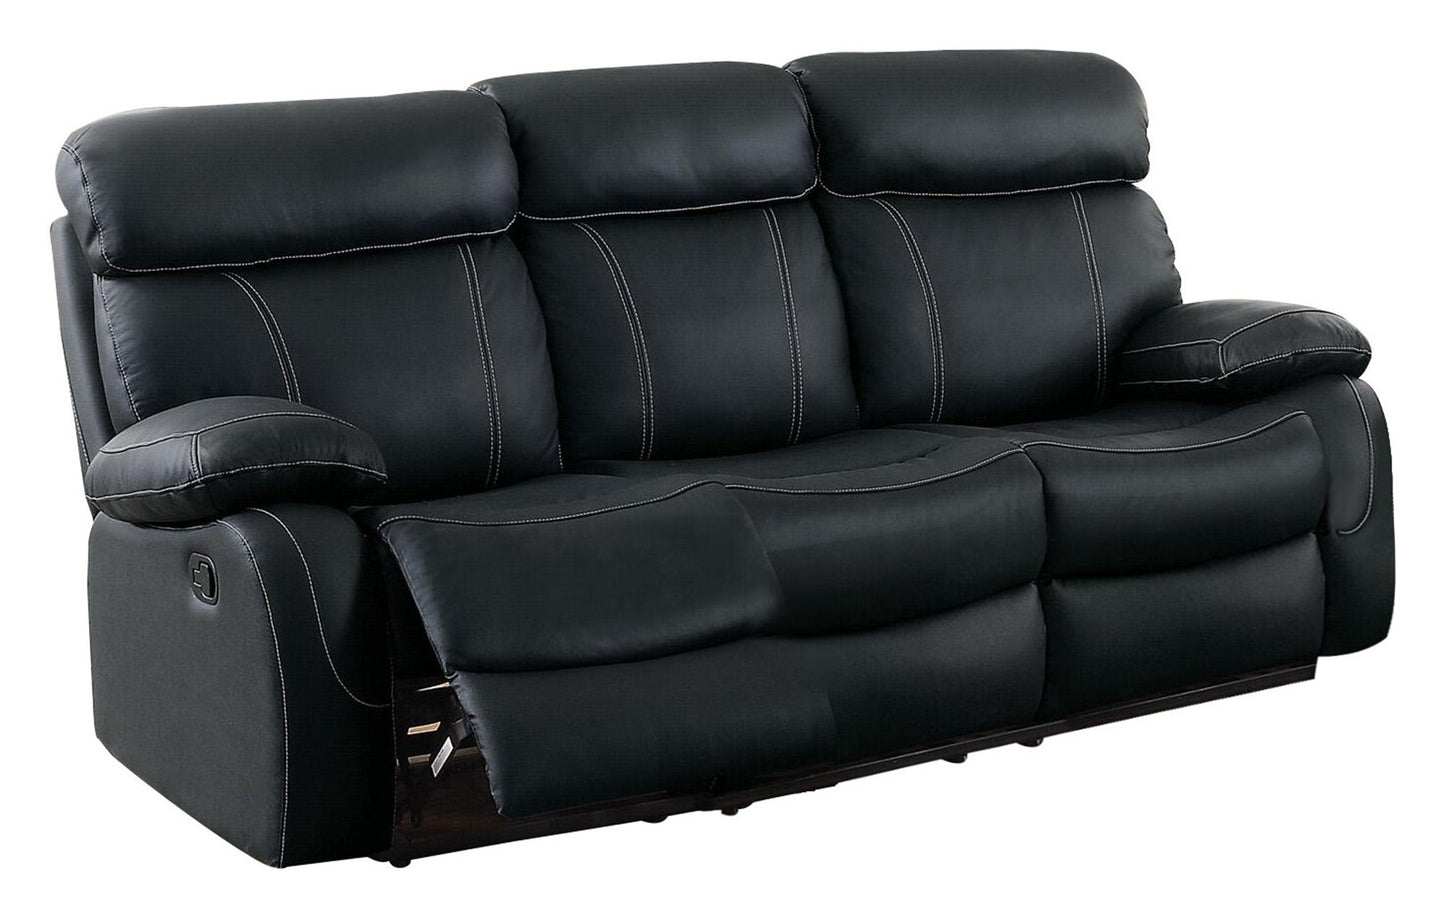 Homelegance Pendu 2PC Double Reclining Sofa & Recliner Chair in Black Leather